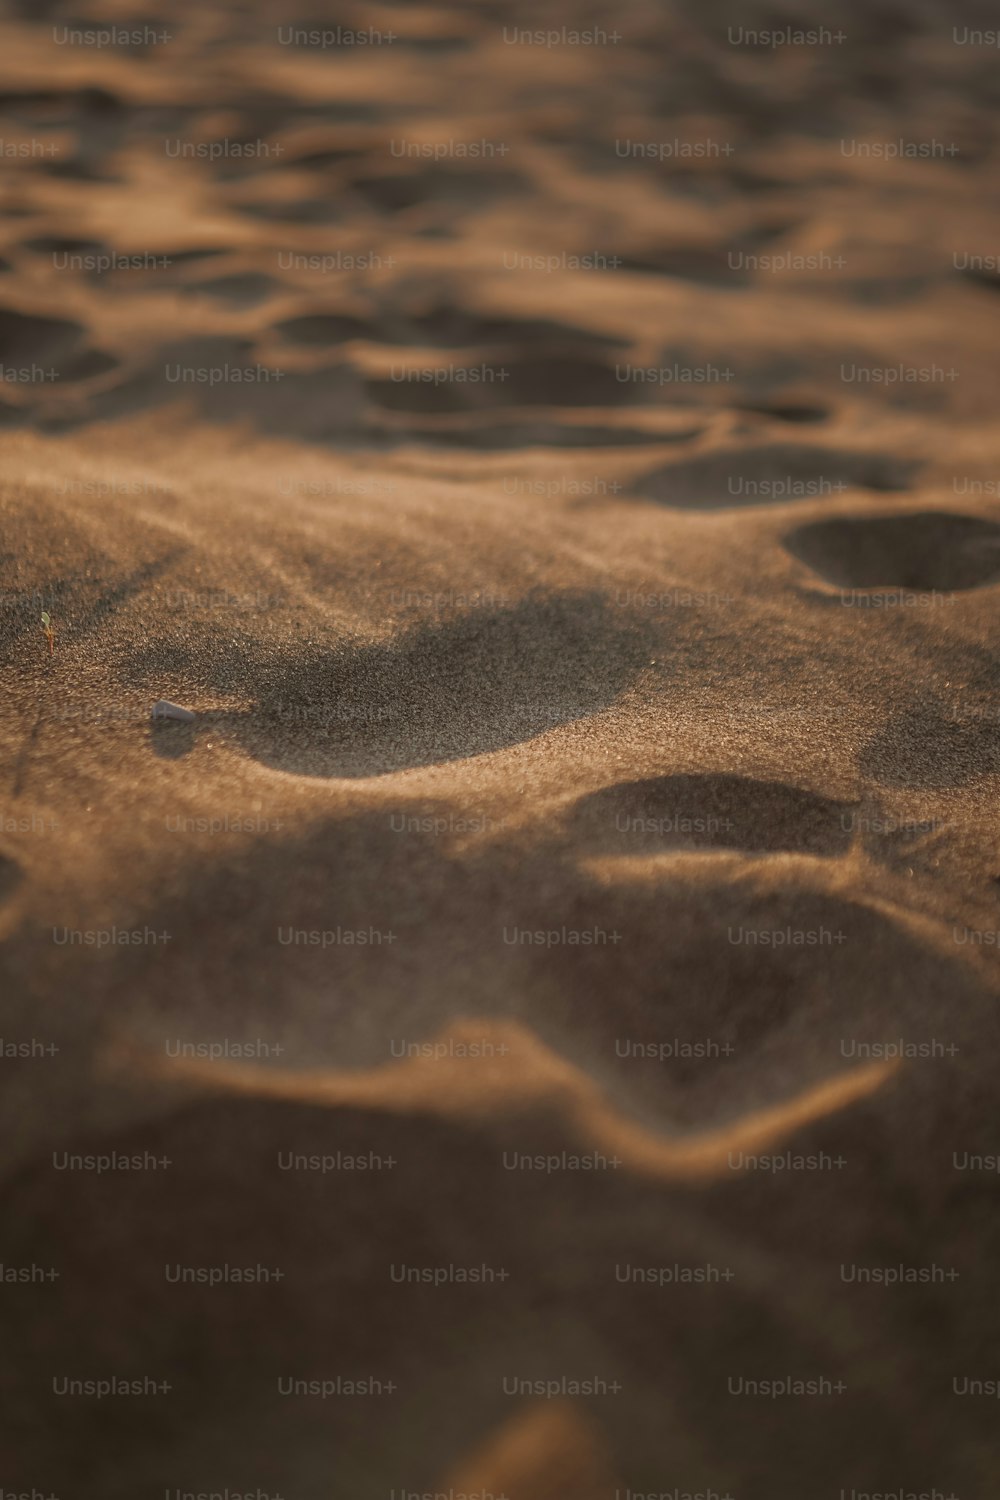 footprints in the sand of a sandy beach